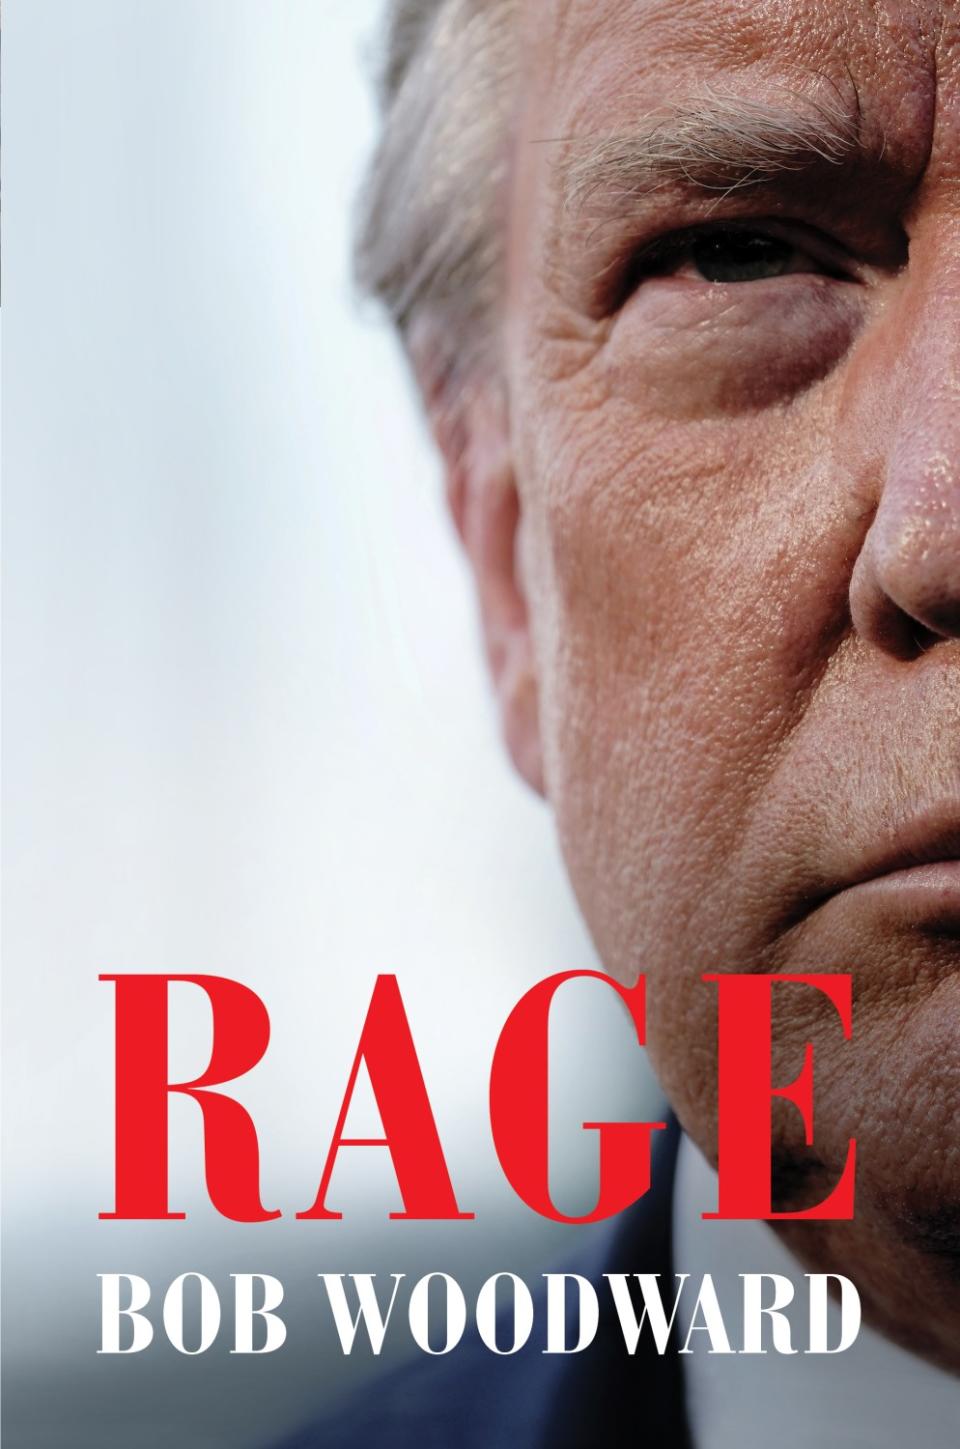 Book jacket for Bob Woodward's of "Rage".